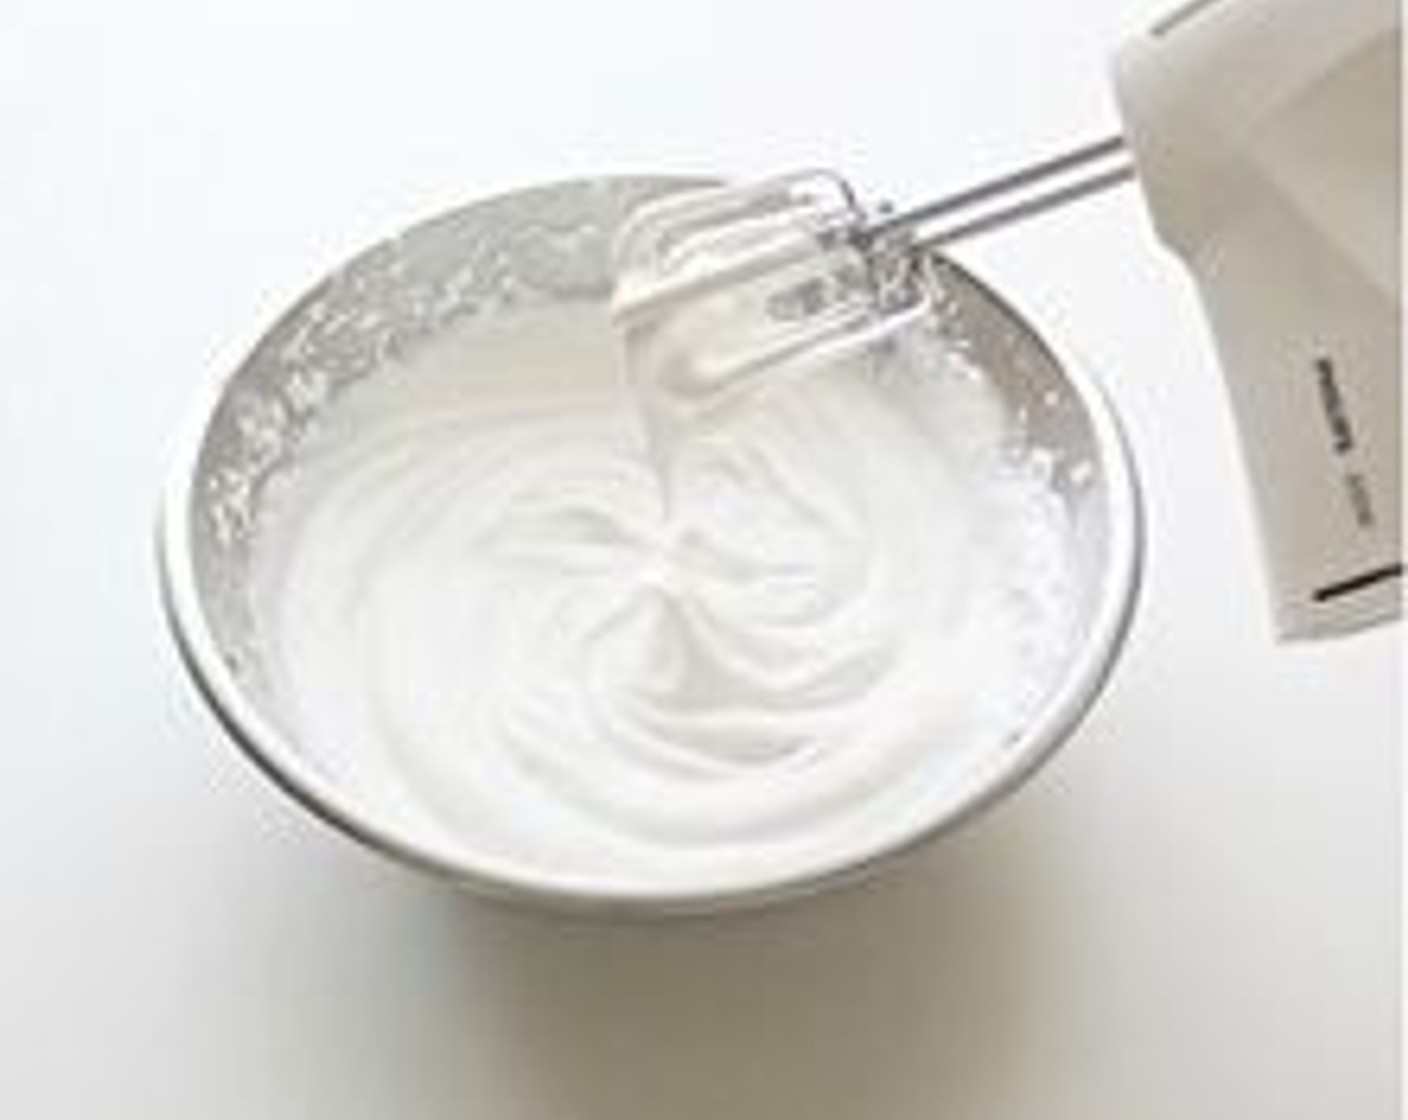 step 14 Whisk Non-Dairy Whipping Cream (9 oz) to peak form but not too stiff and mix evenly into blueberry liquid mixture with a hand whisk.